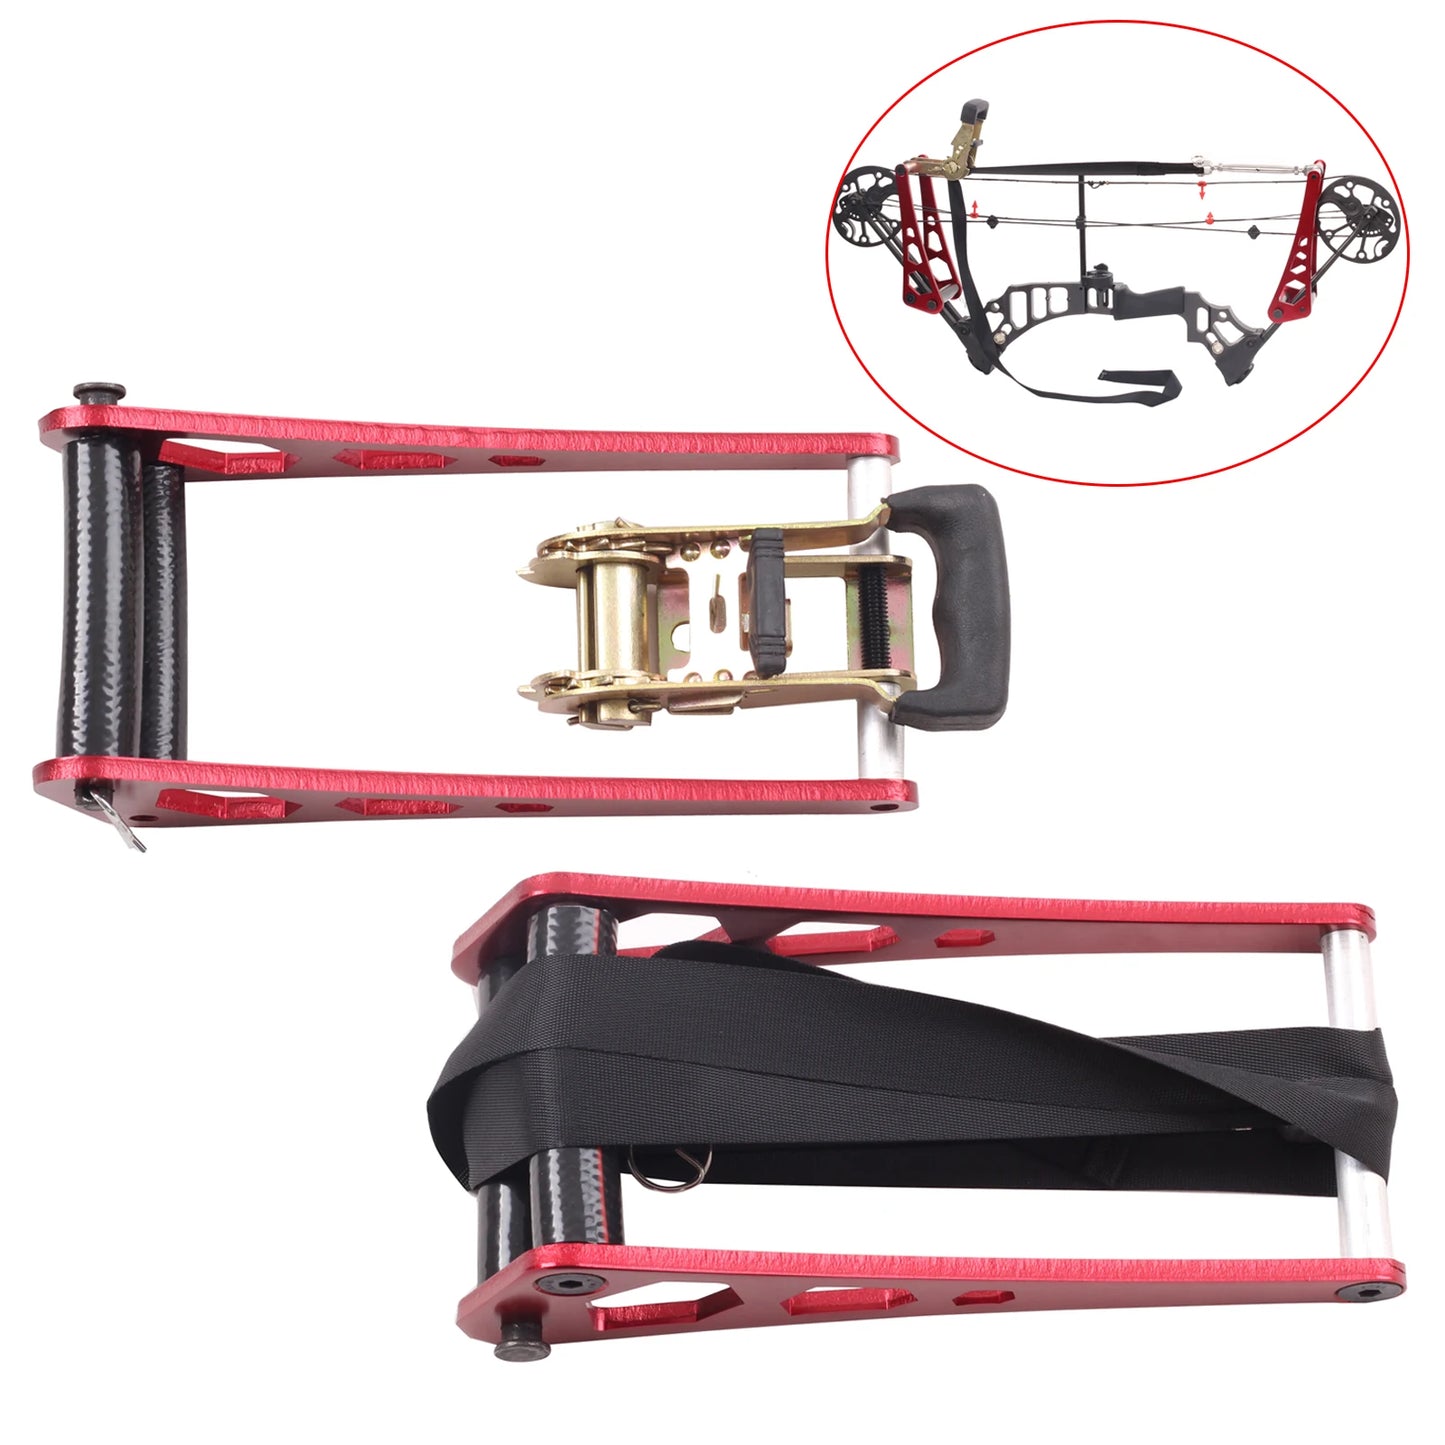 Handheld Compound Bow Press Portable Ratchet-Loc Press Aluminum Alloy Bow Press High-Quality Archery Bow Opener